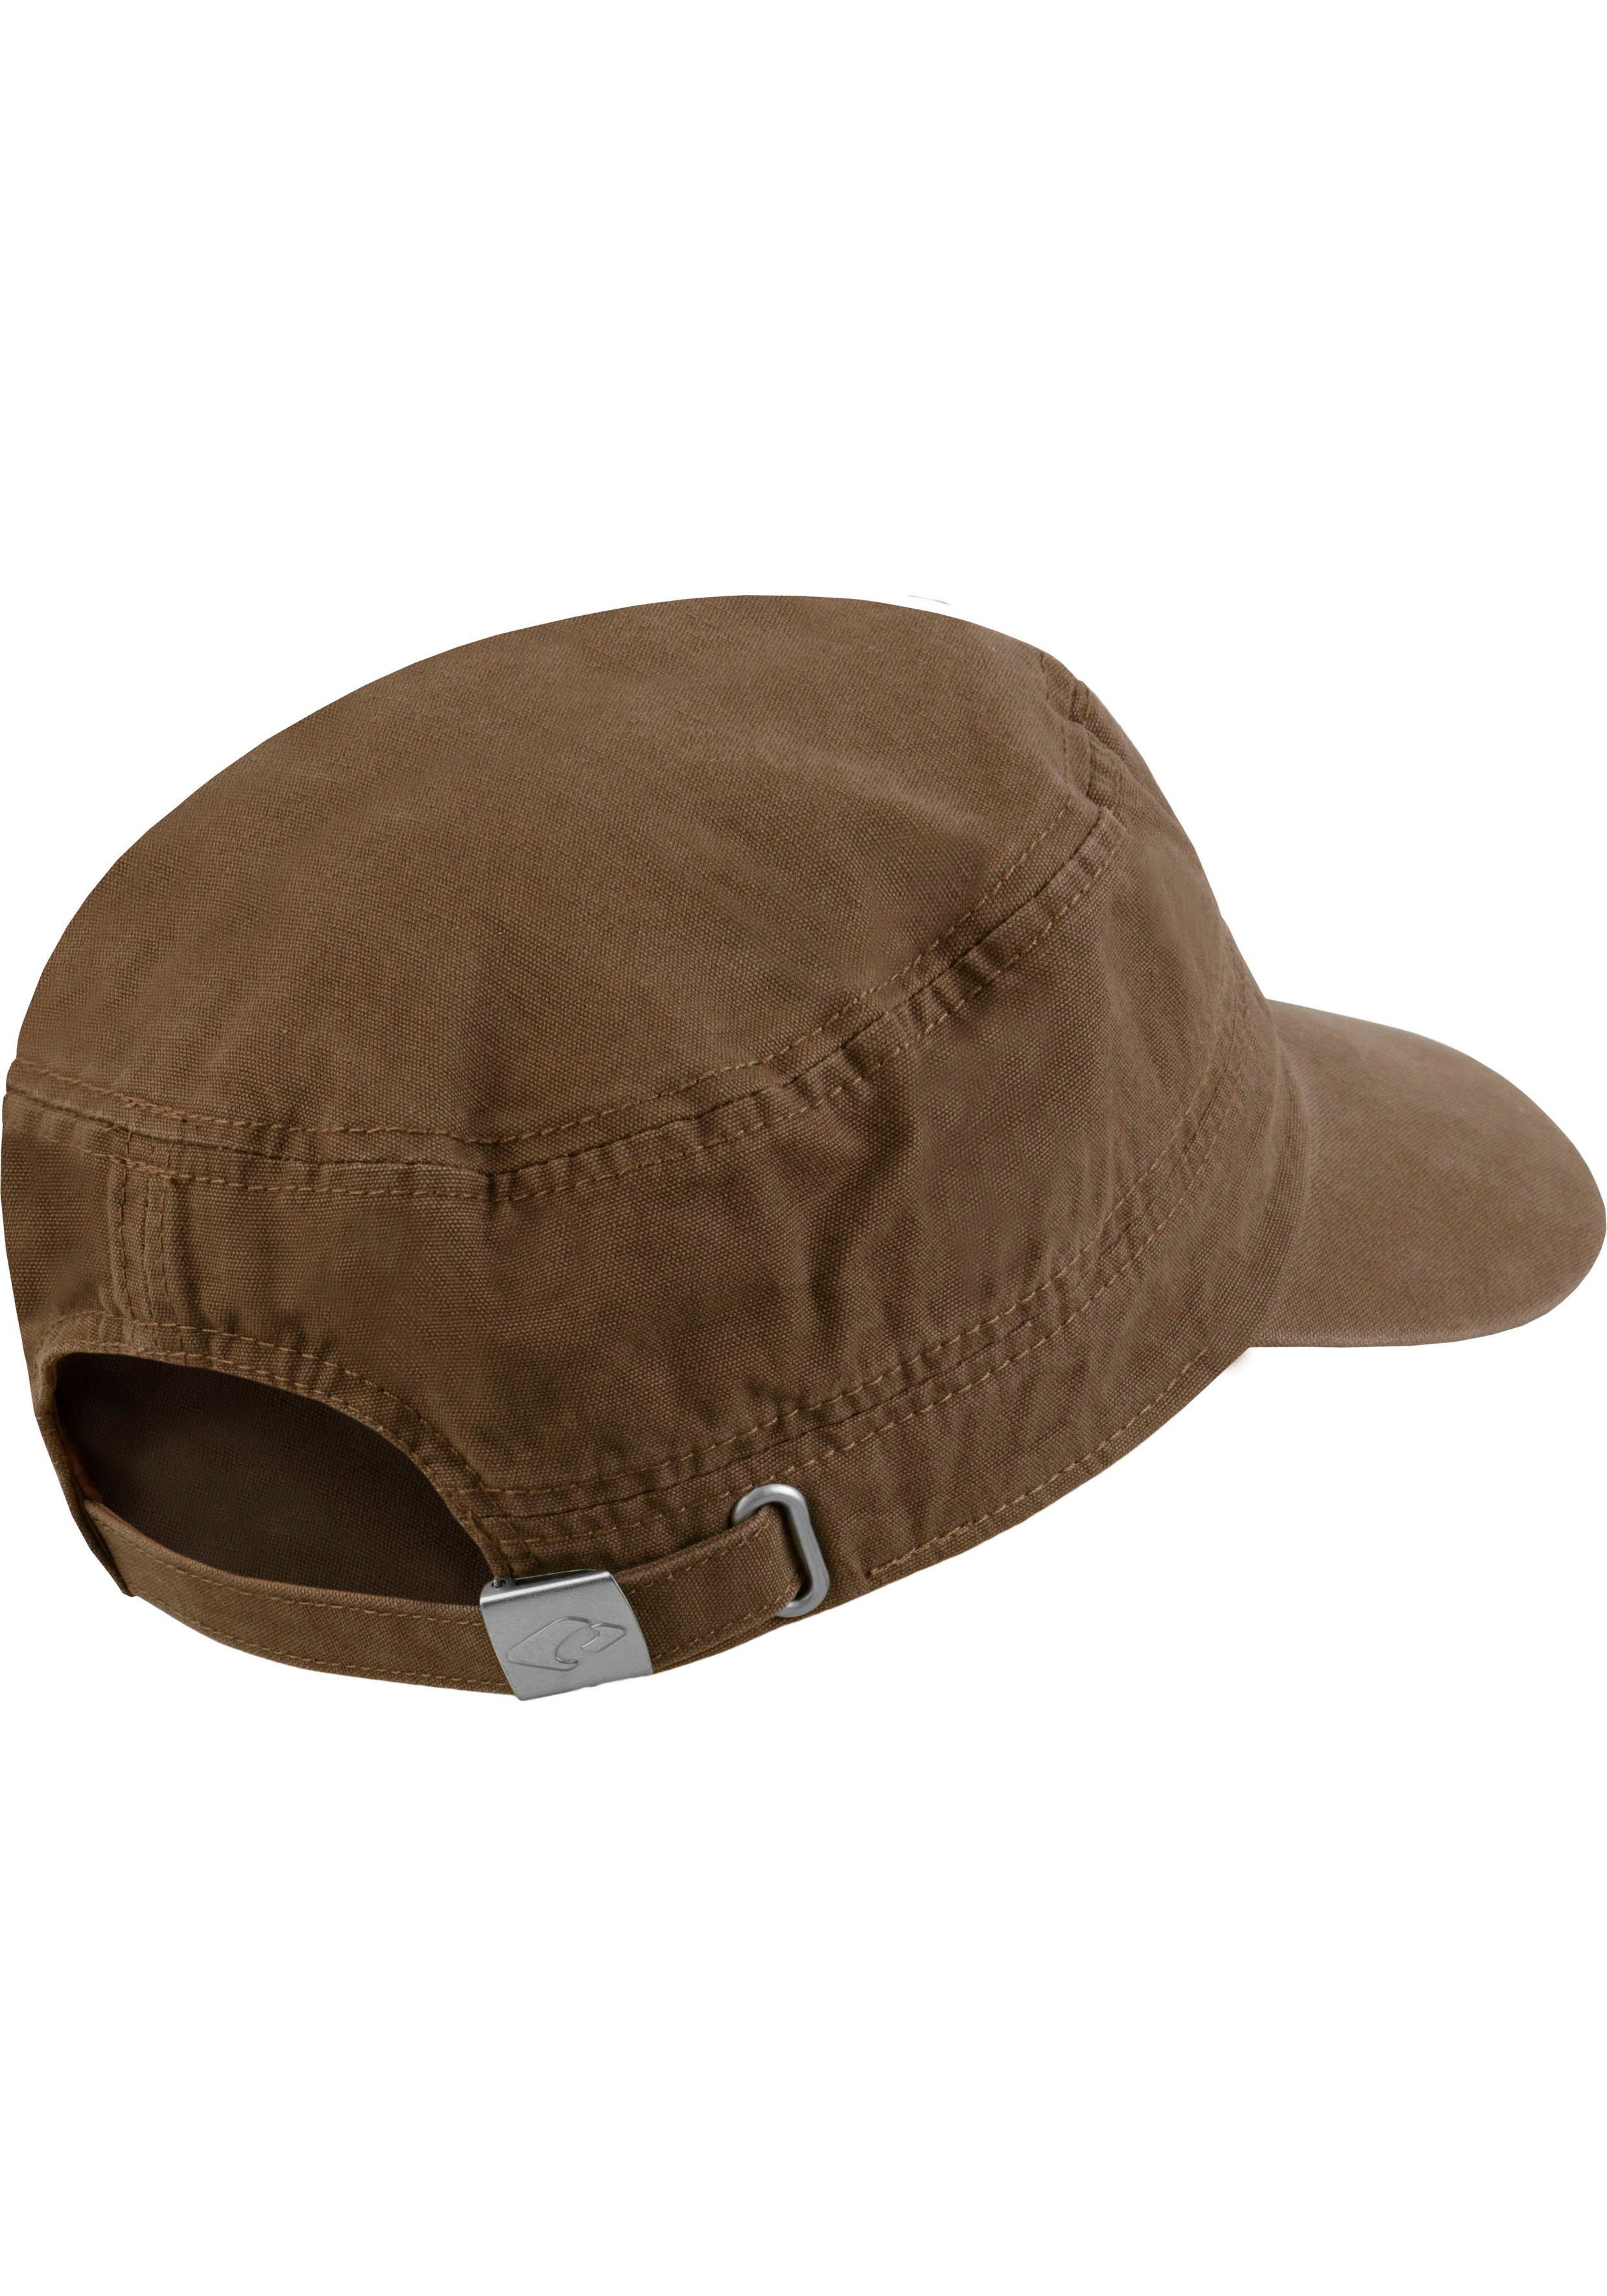 chillouts Army Cap Dublin Cap Hat im braun Mililtary-Style